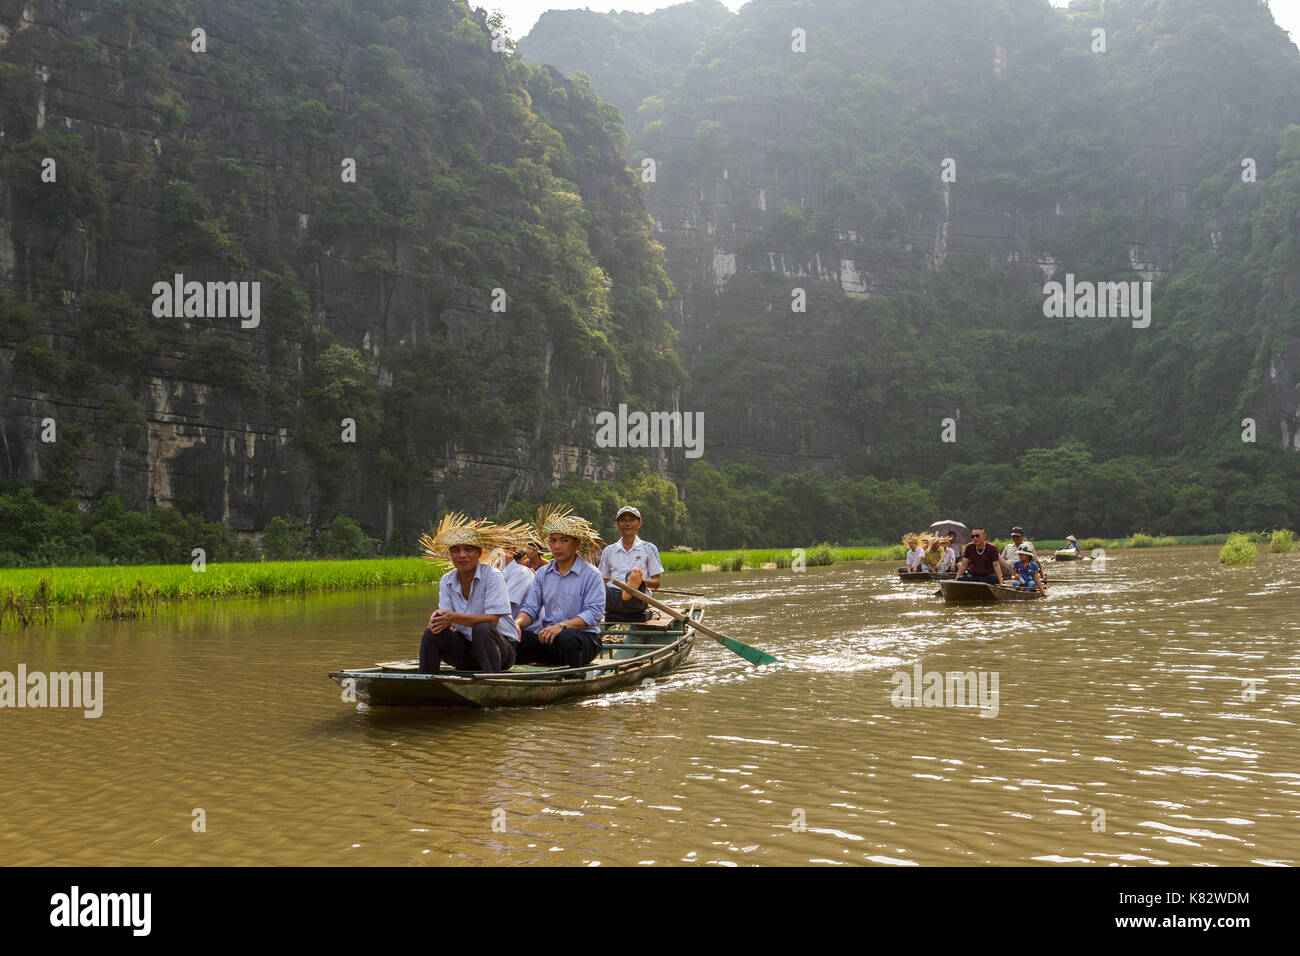 NINH BINH, VIETNAM - 5/6/2016: Boats of tourists on the Ngo Dong River, near Tam Coc village, at the Trang An UNESCO World Heritage site in Ninh Binh, Stock Photo